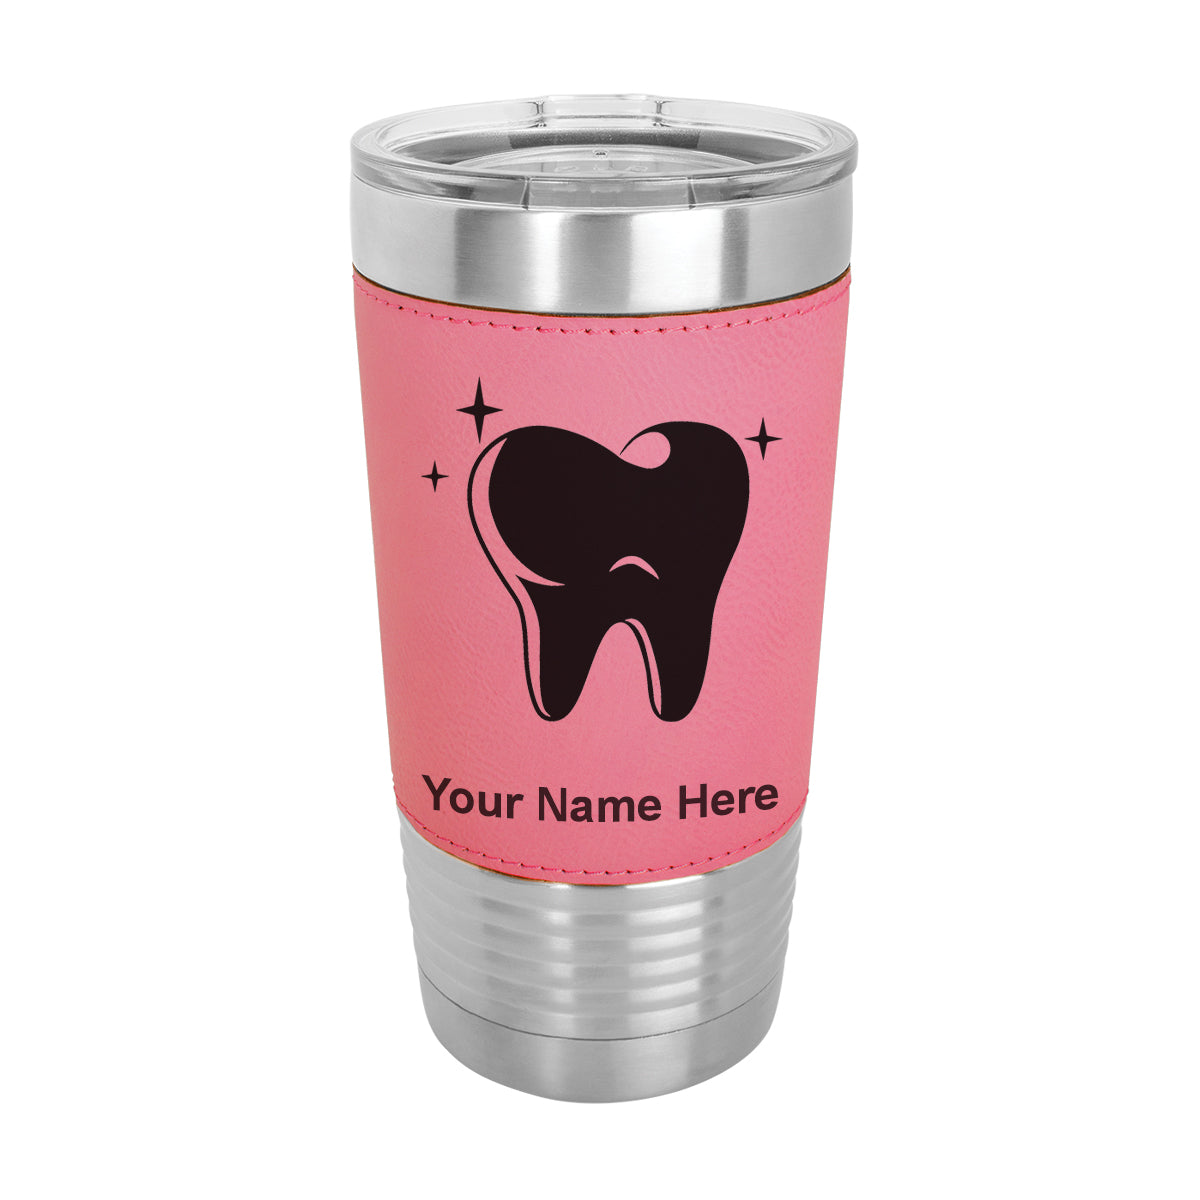 20oz Faux Leather Tumbler Mug, Tooth, Personalized Engraving Included